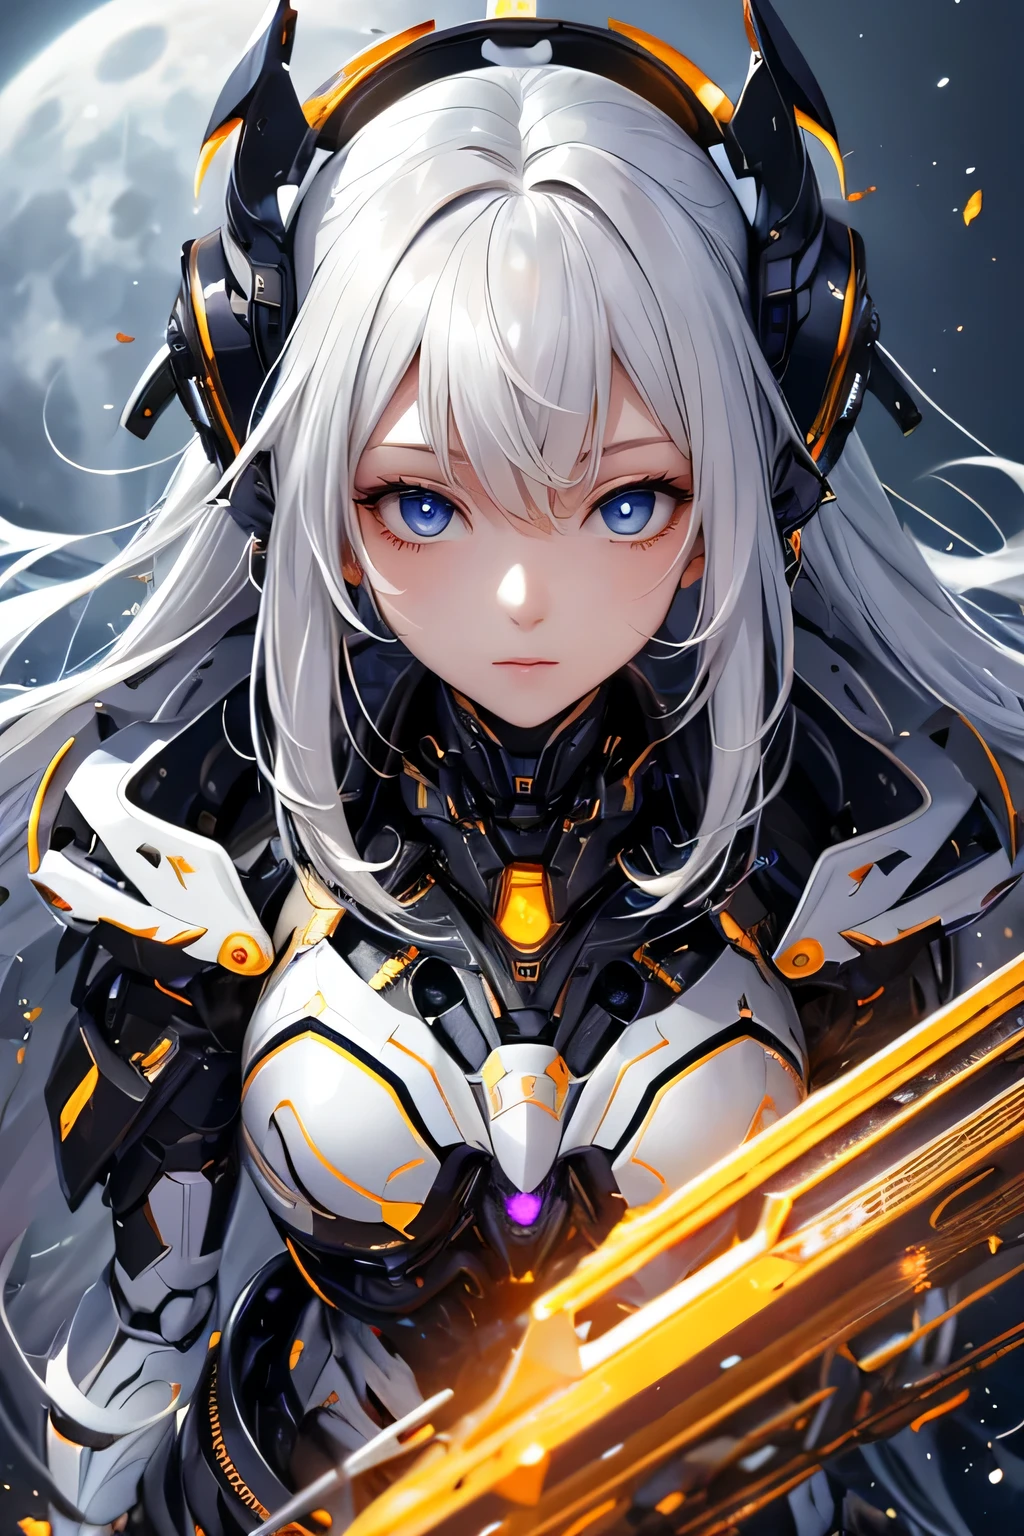 CG Mecha、beautiful eyes、Upper body、woman、（（Overall image））、Portrait、get down on one knee、robot、white orange armor、neon、8K、born、Highest image quality、muste piece、ultra high resolution、colorful、(Medium-wide)、(Dynamic Perspective)、sharp focus、(Depth of bounds written)、highly detailed eyes and face、beautiful detailed eyes、Black gold、trimming gear:1.2)、((muste piece、Highest image quality))、detailed background、Inside the spacecraft、gray hair、Luminescent、full moon、gtx4090、stand up、matrix、dark fantasy,Crescent Moon、abyss、perfect form